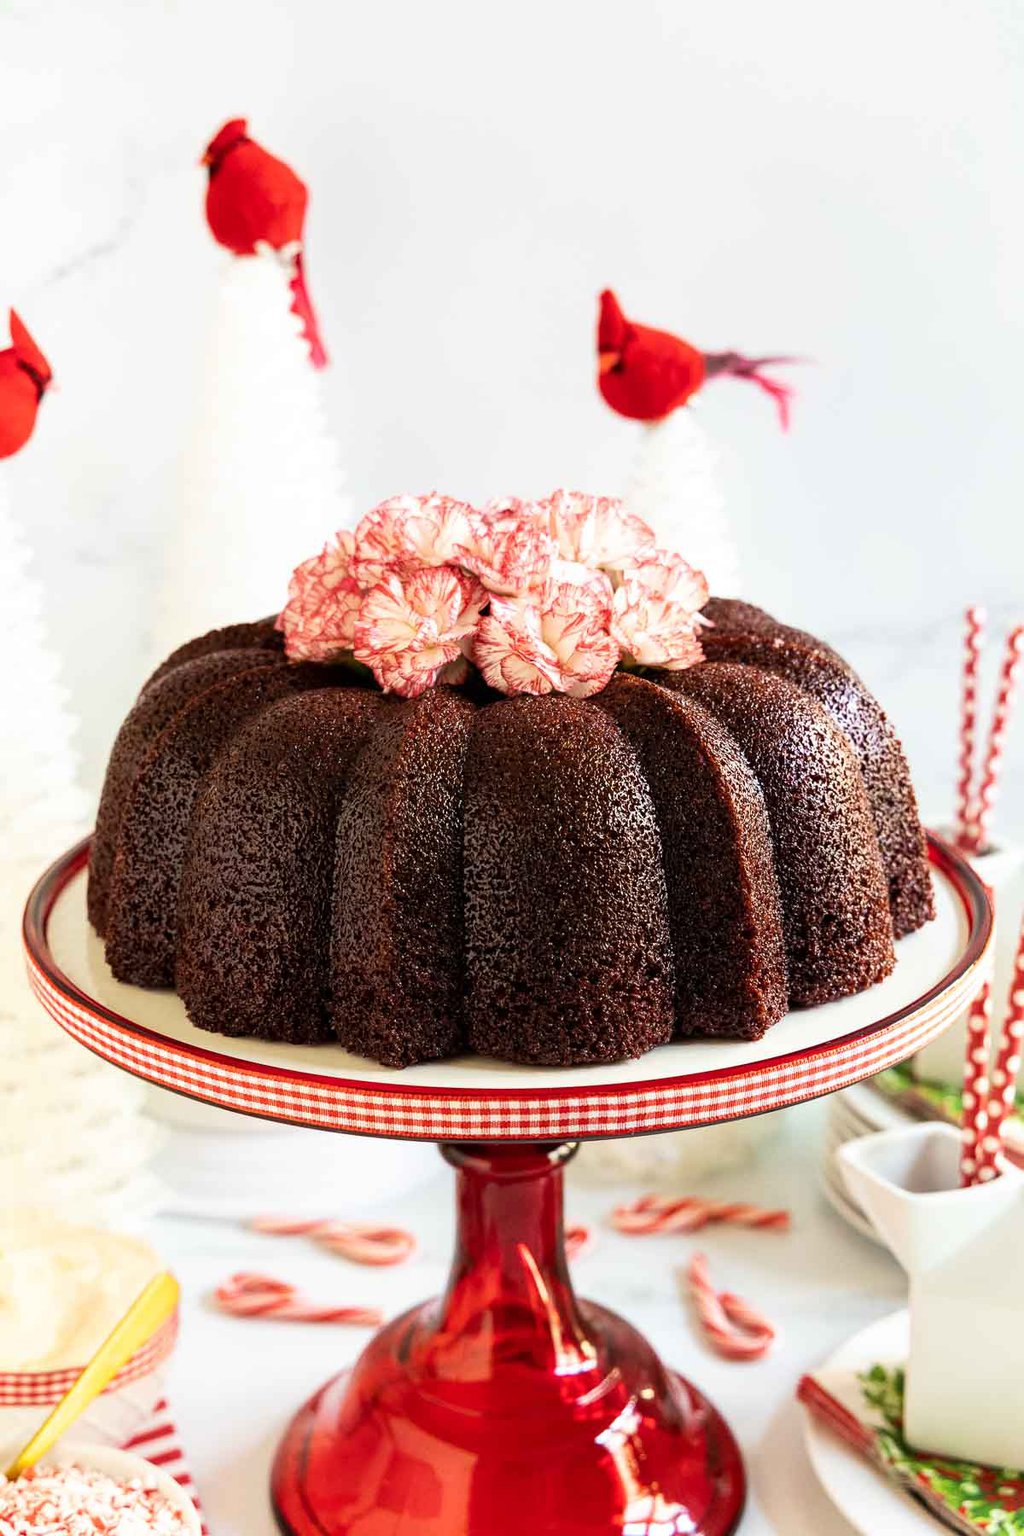 Vertical photo of a Ridiculously Easy Peppermint-Glazed Red Velvet Bundt Cake surrounded by cartons of milk and candy canes and decorated with red and white carnations.